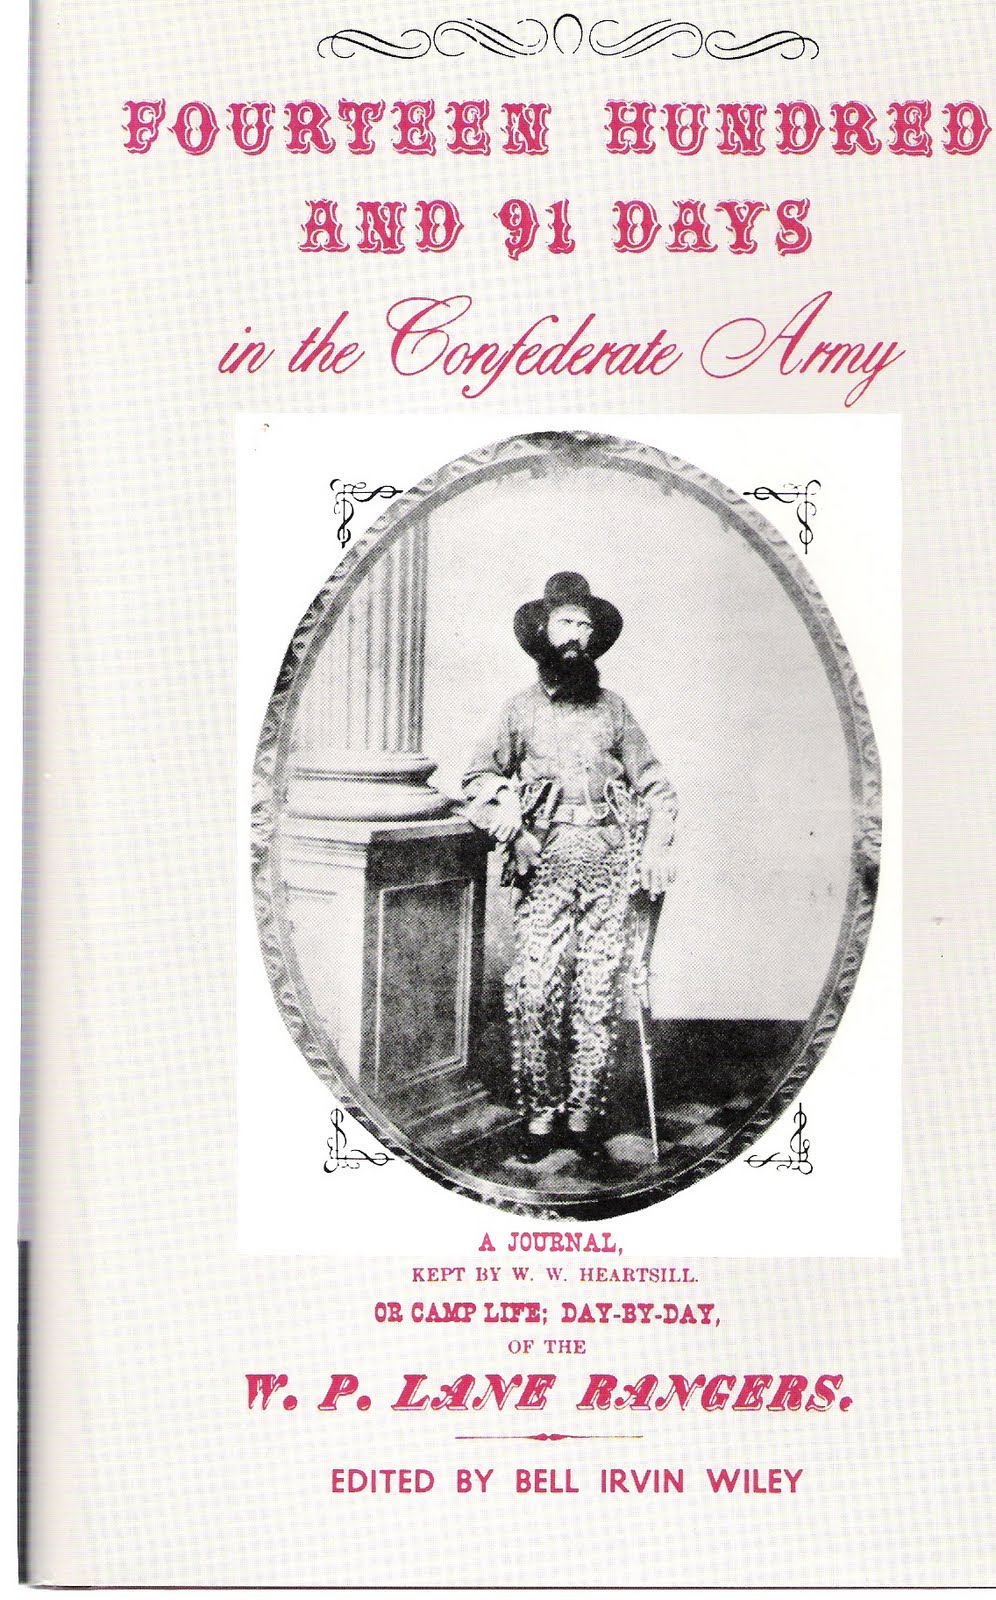 Fourteen hundred and 91 days in the Confederate Army: A journal kept W. W. Heartsill for four years, one month, and one day. Or, Camp life, day